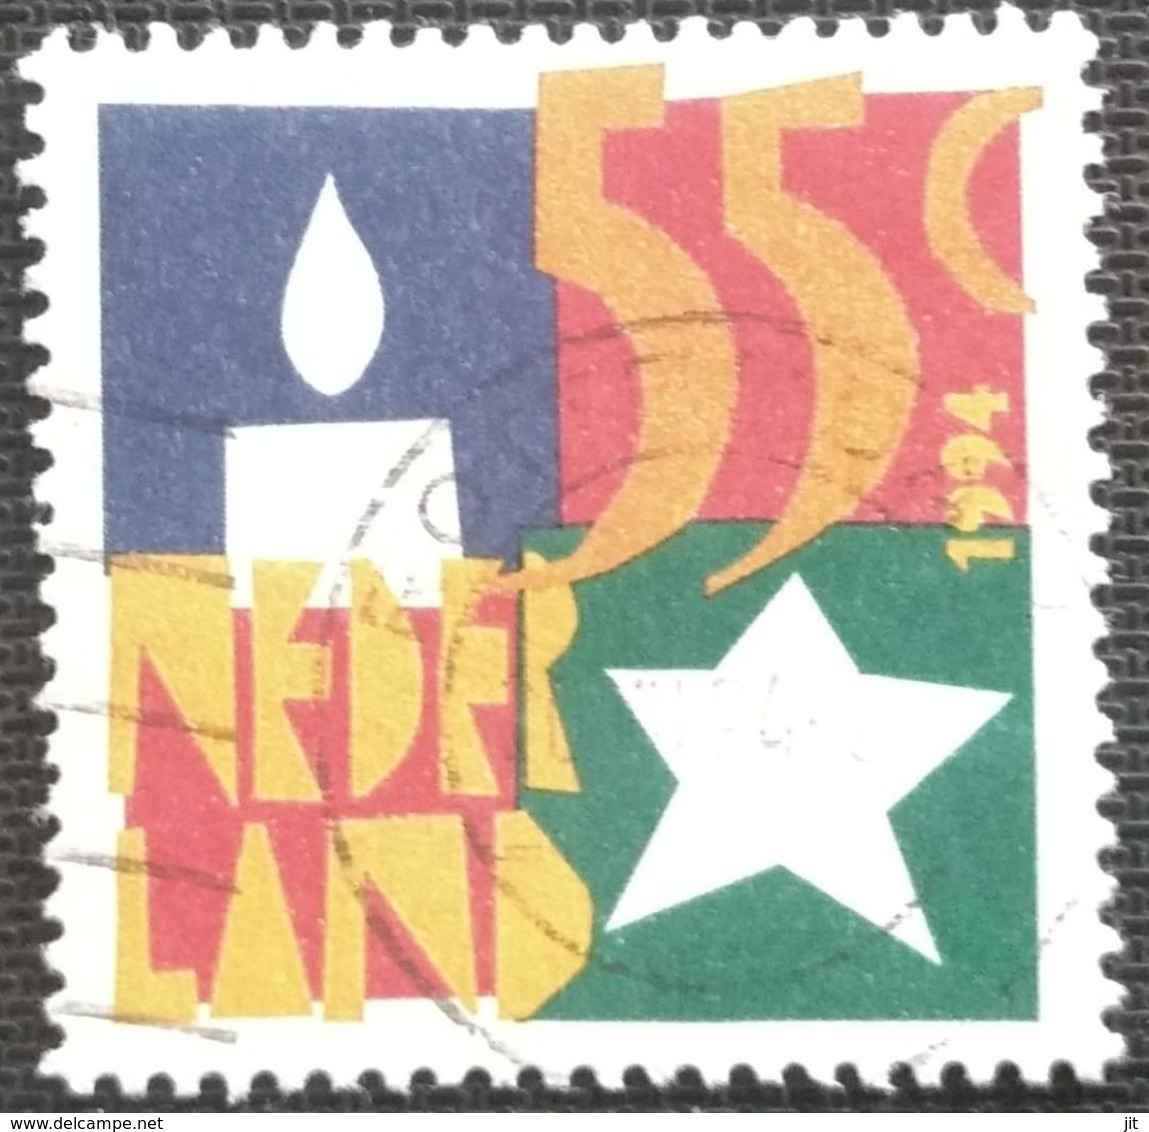 027. NETHERLANDS 1994  USED STAMP - Used Stamps